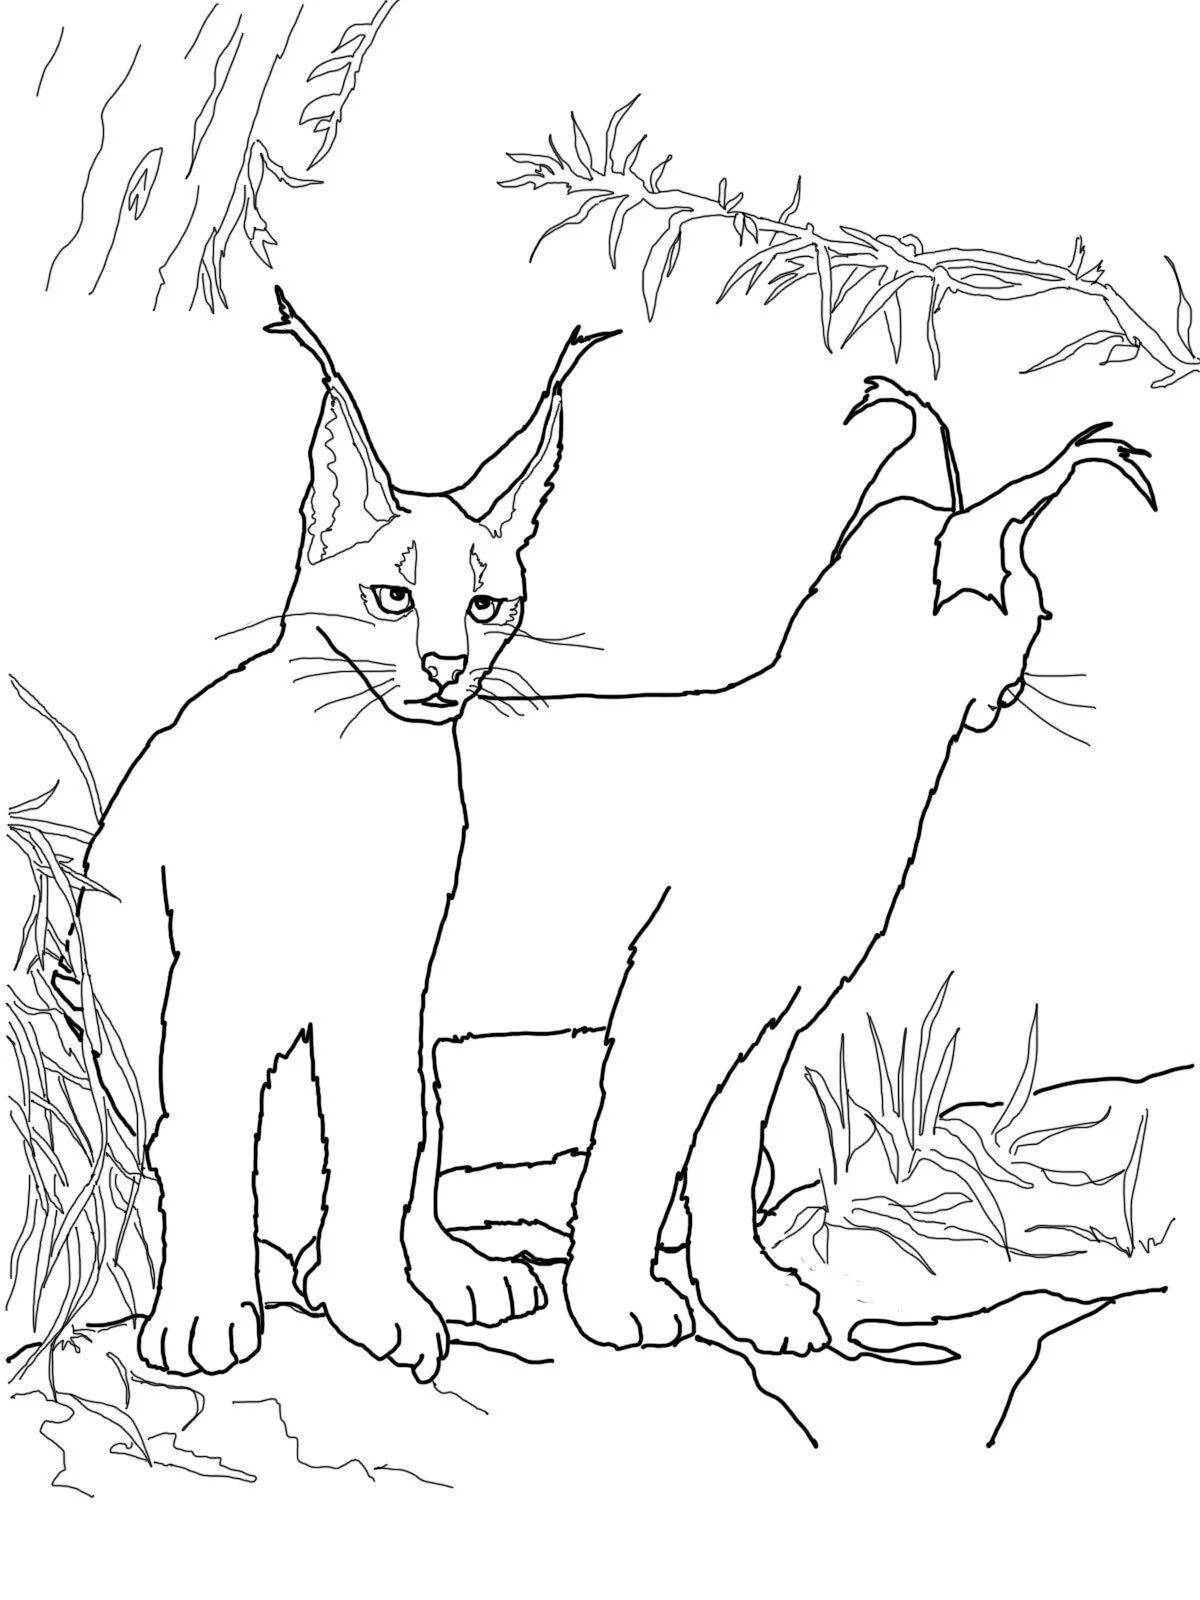 Outstanding caracal coloring page